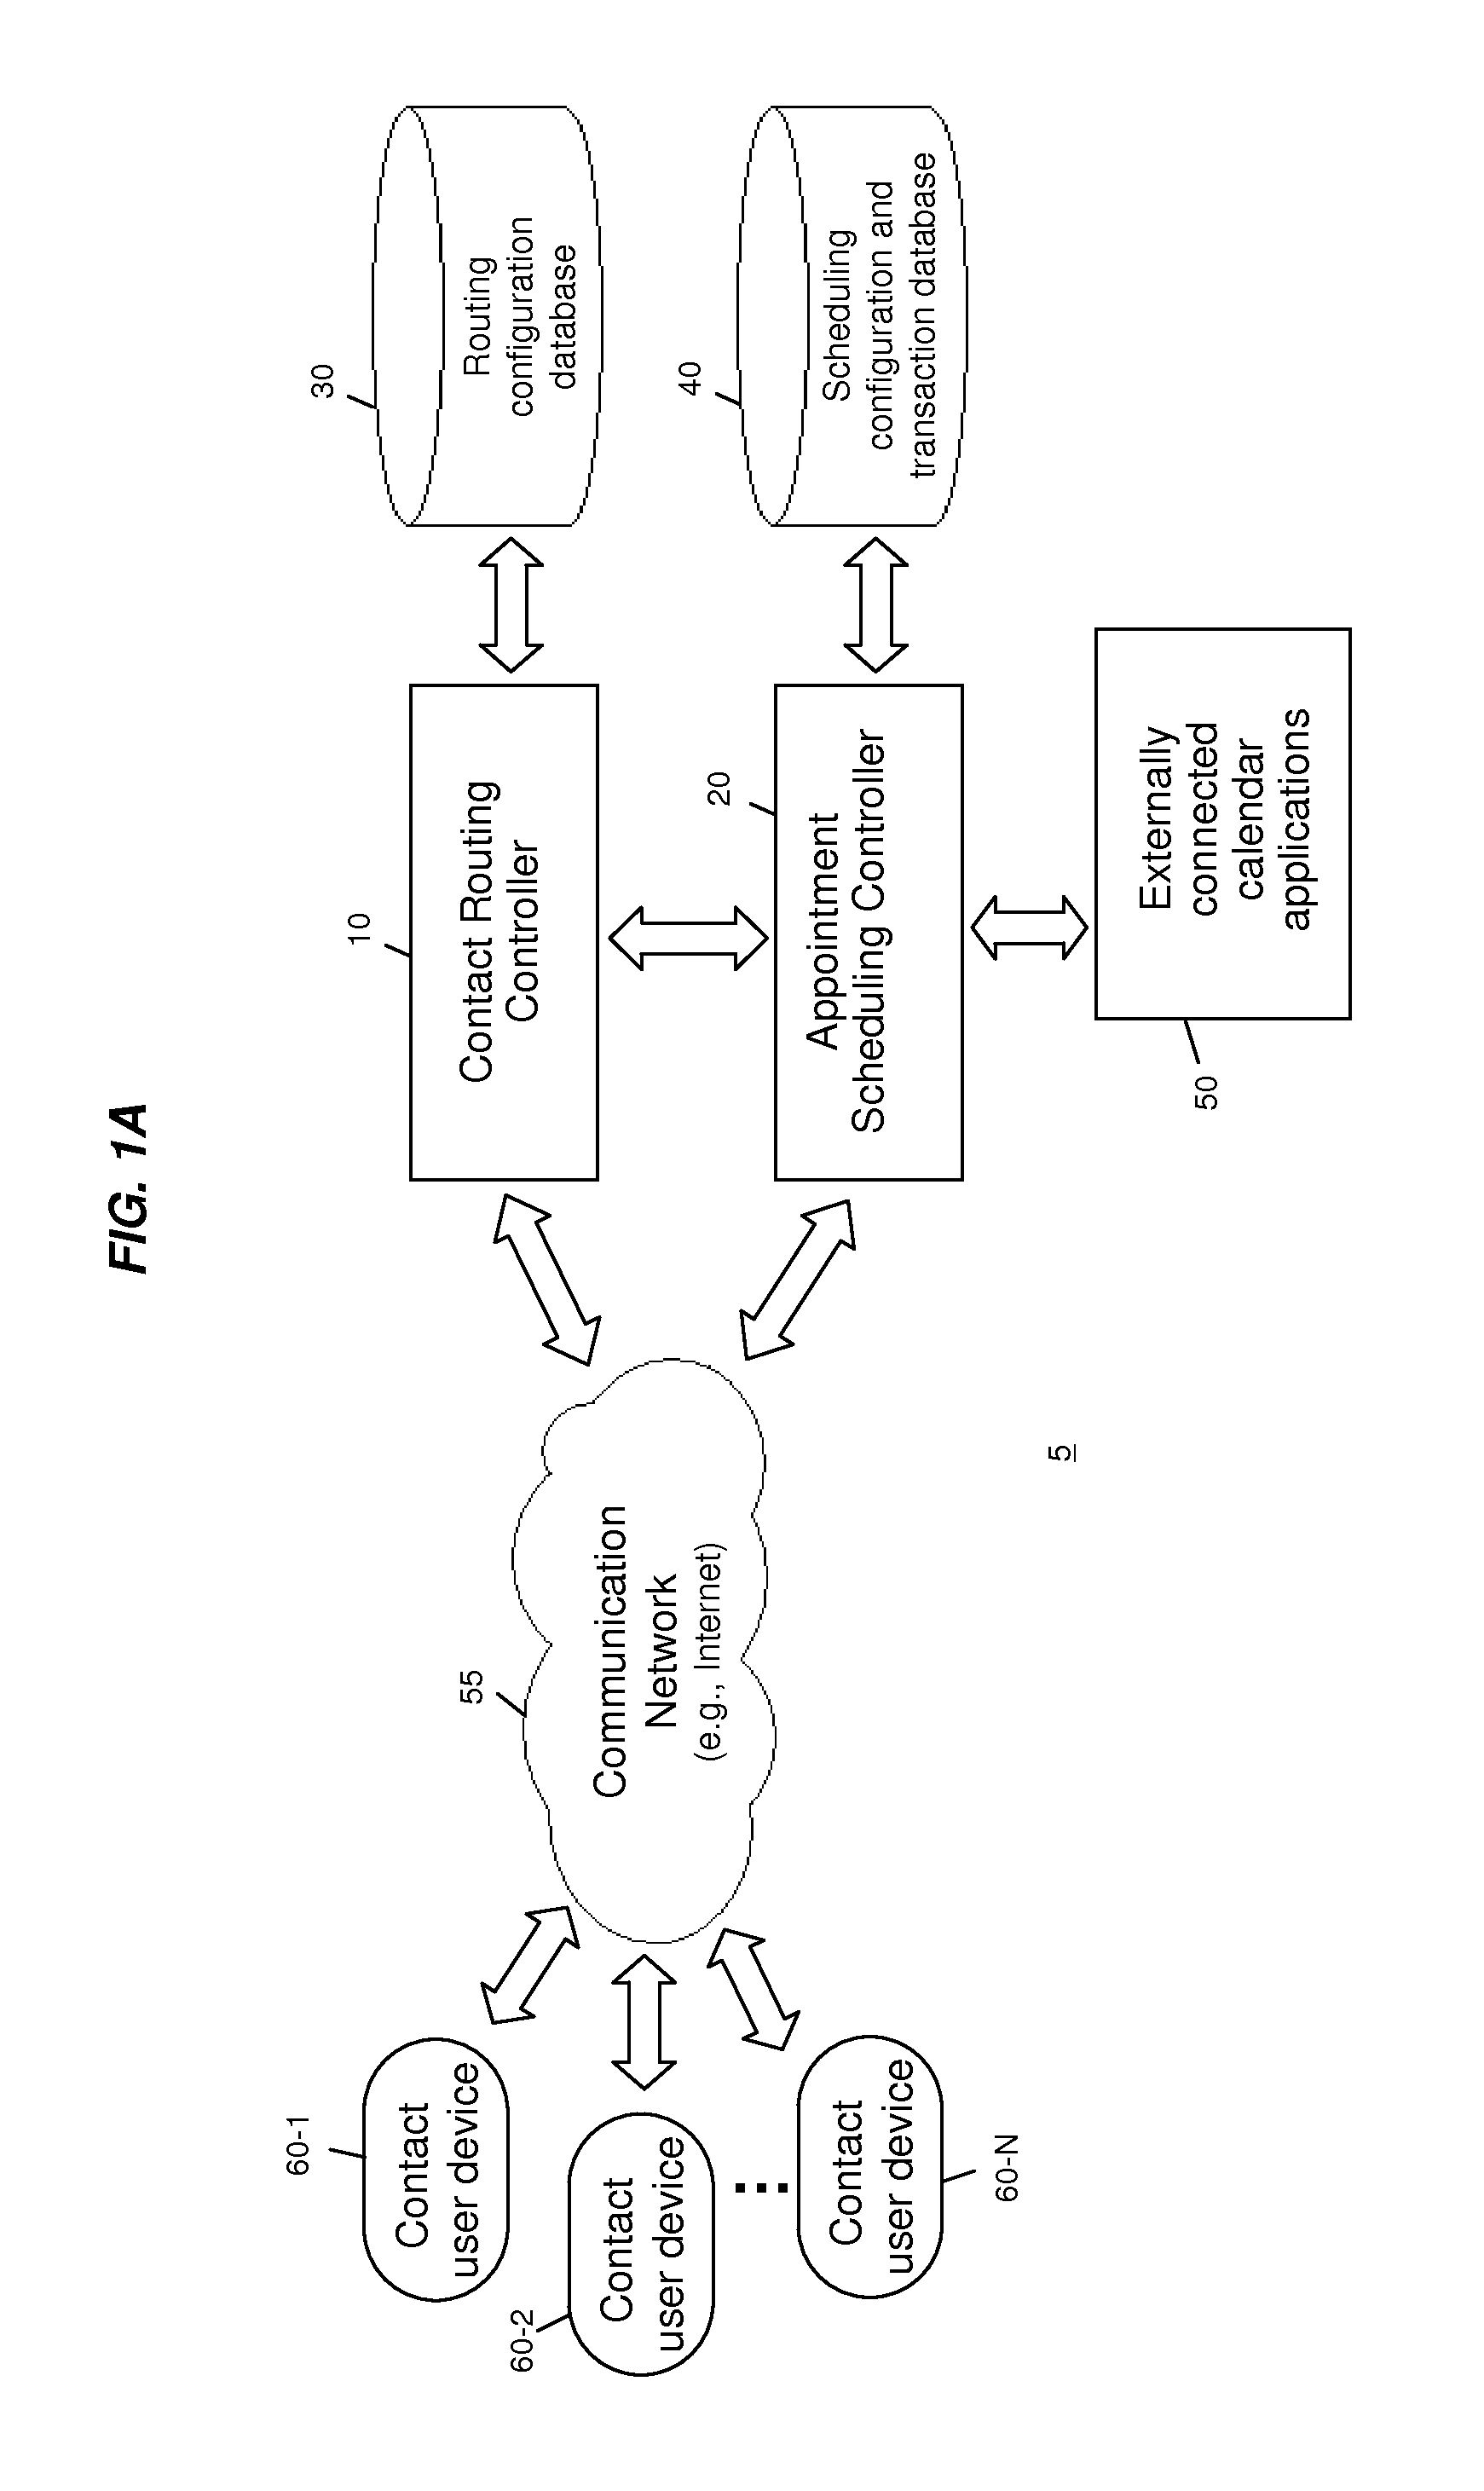 Availability-Based Contact Routing and Scheduling System